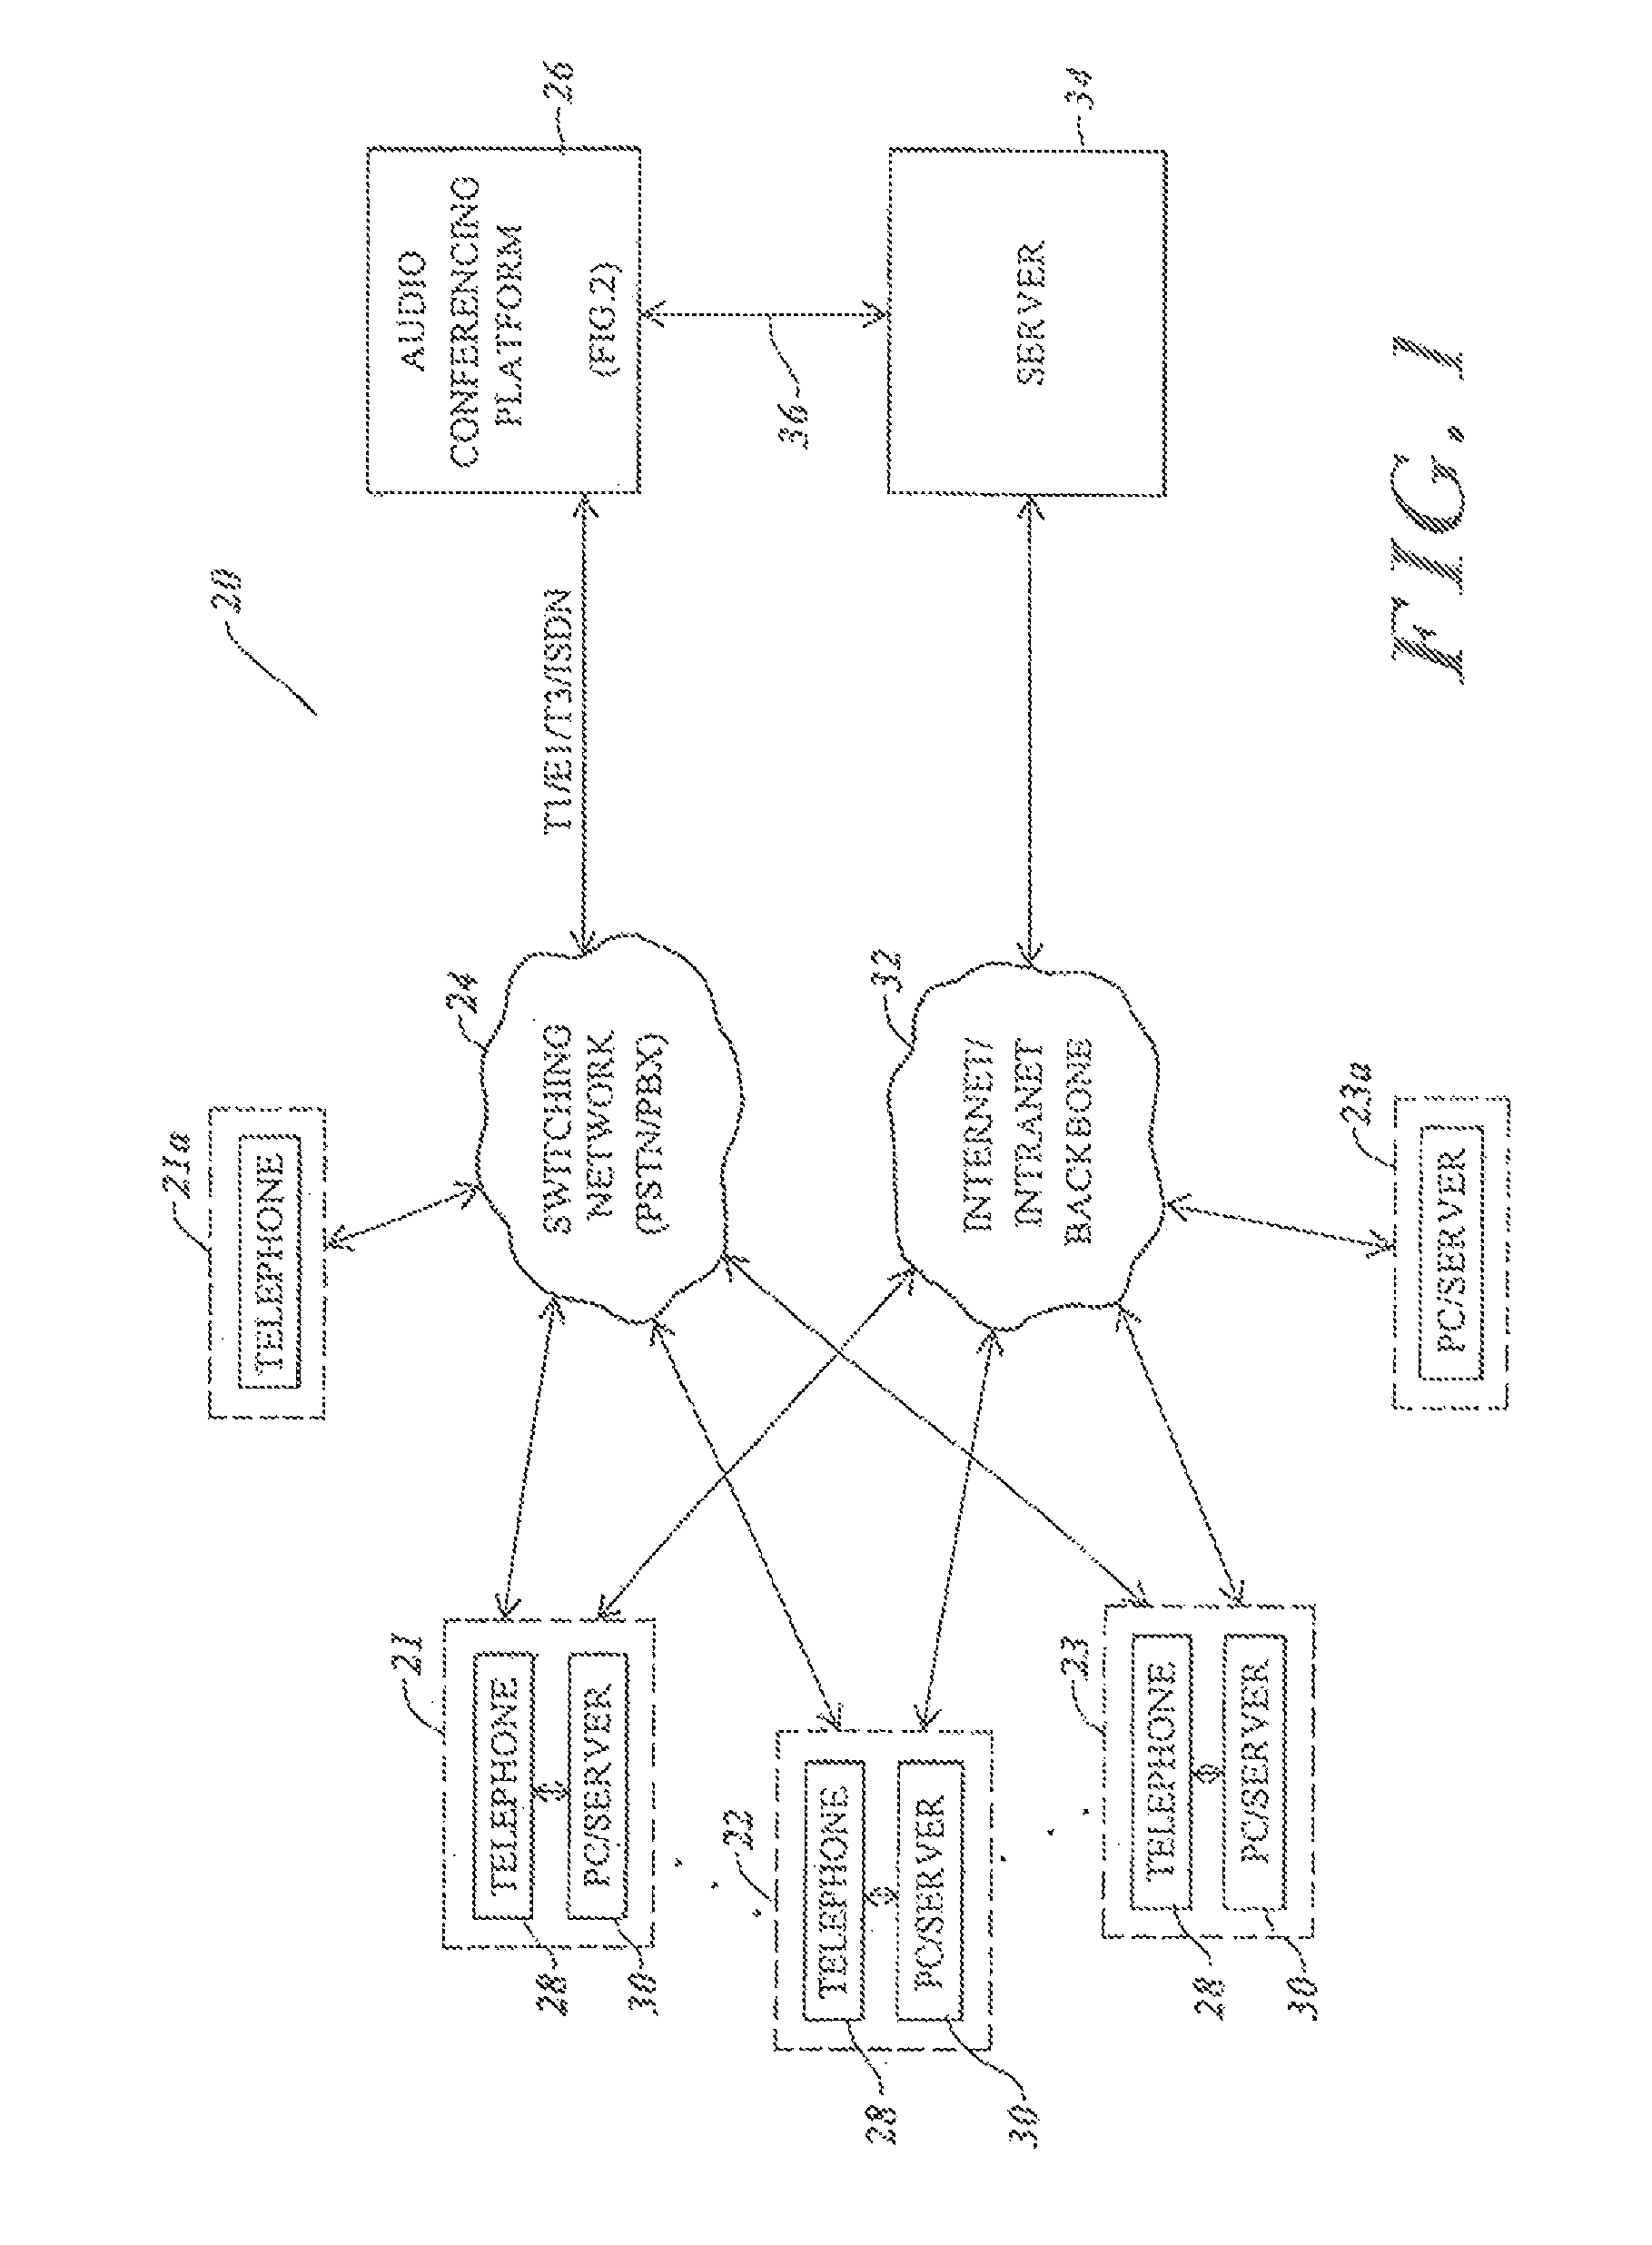 Audio conference platform with dynamic speech detection threshold